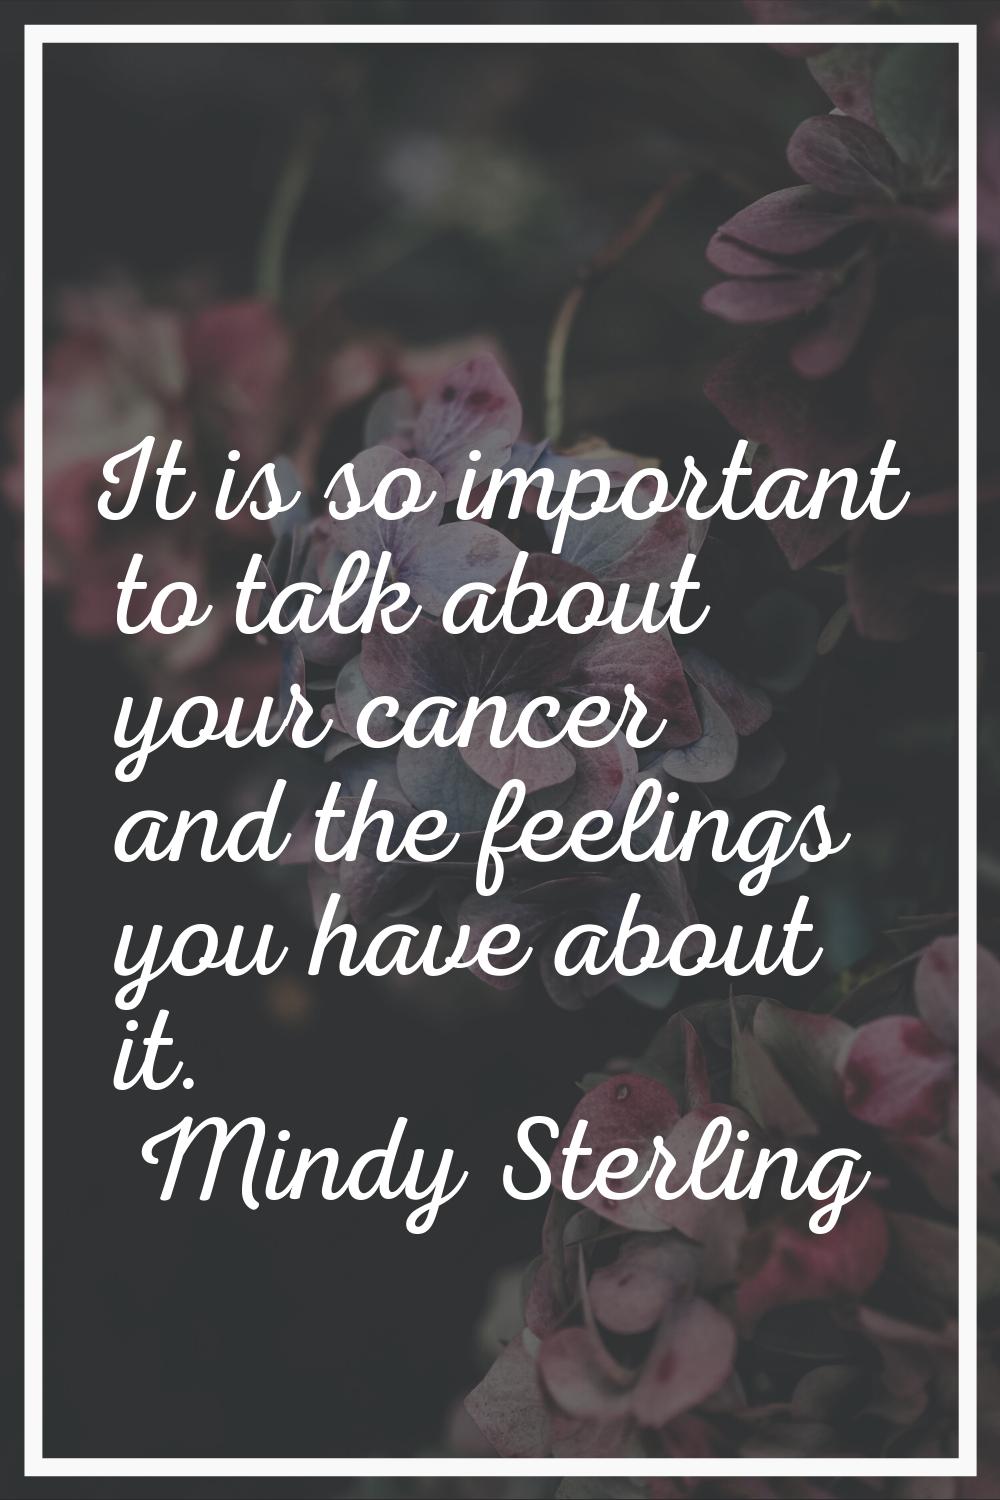 It is so important to talk about your cancer and the feelings you have about it.